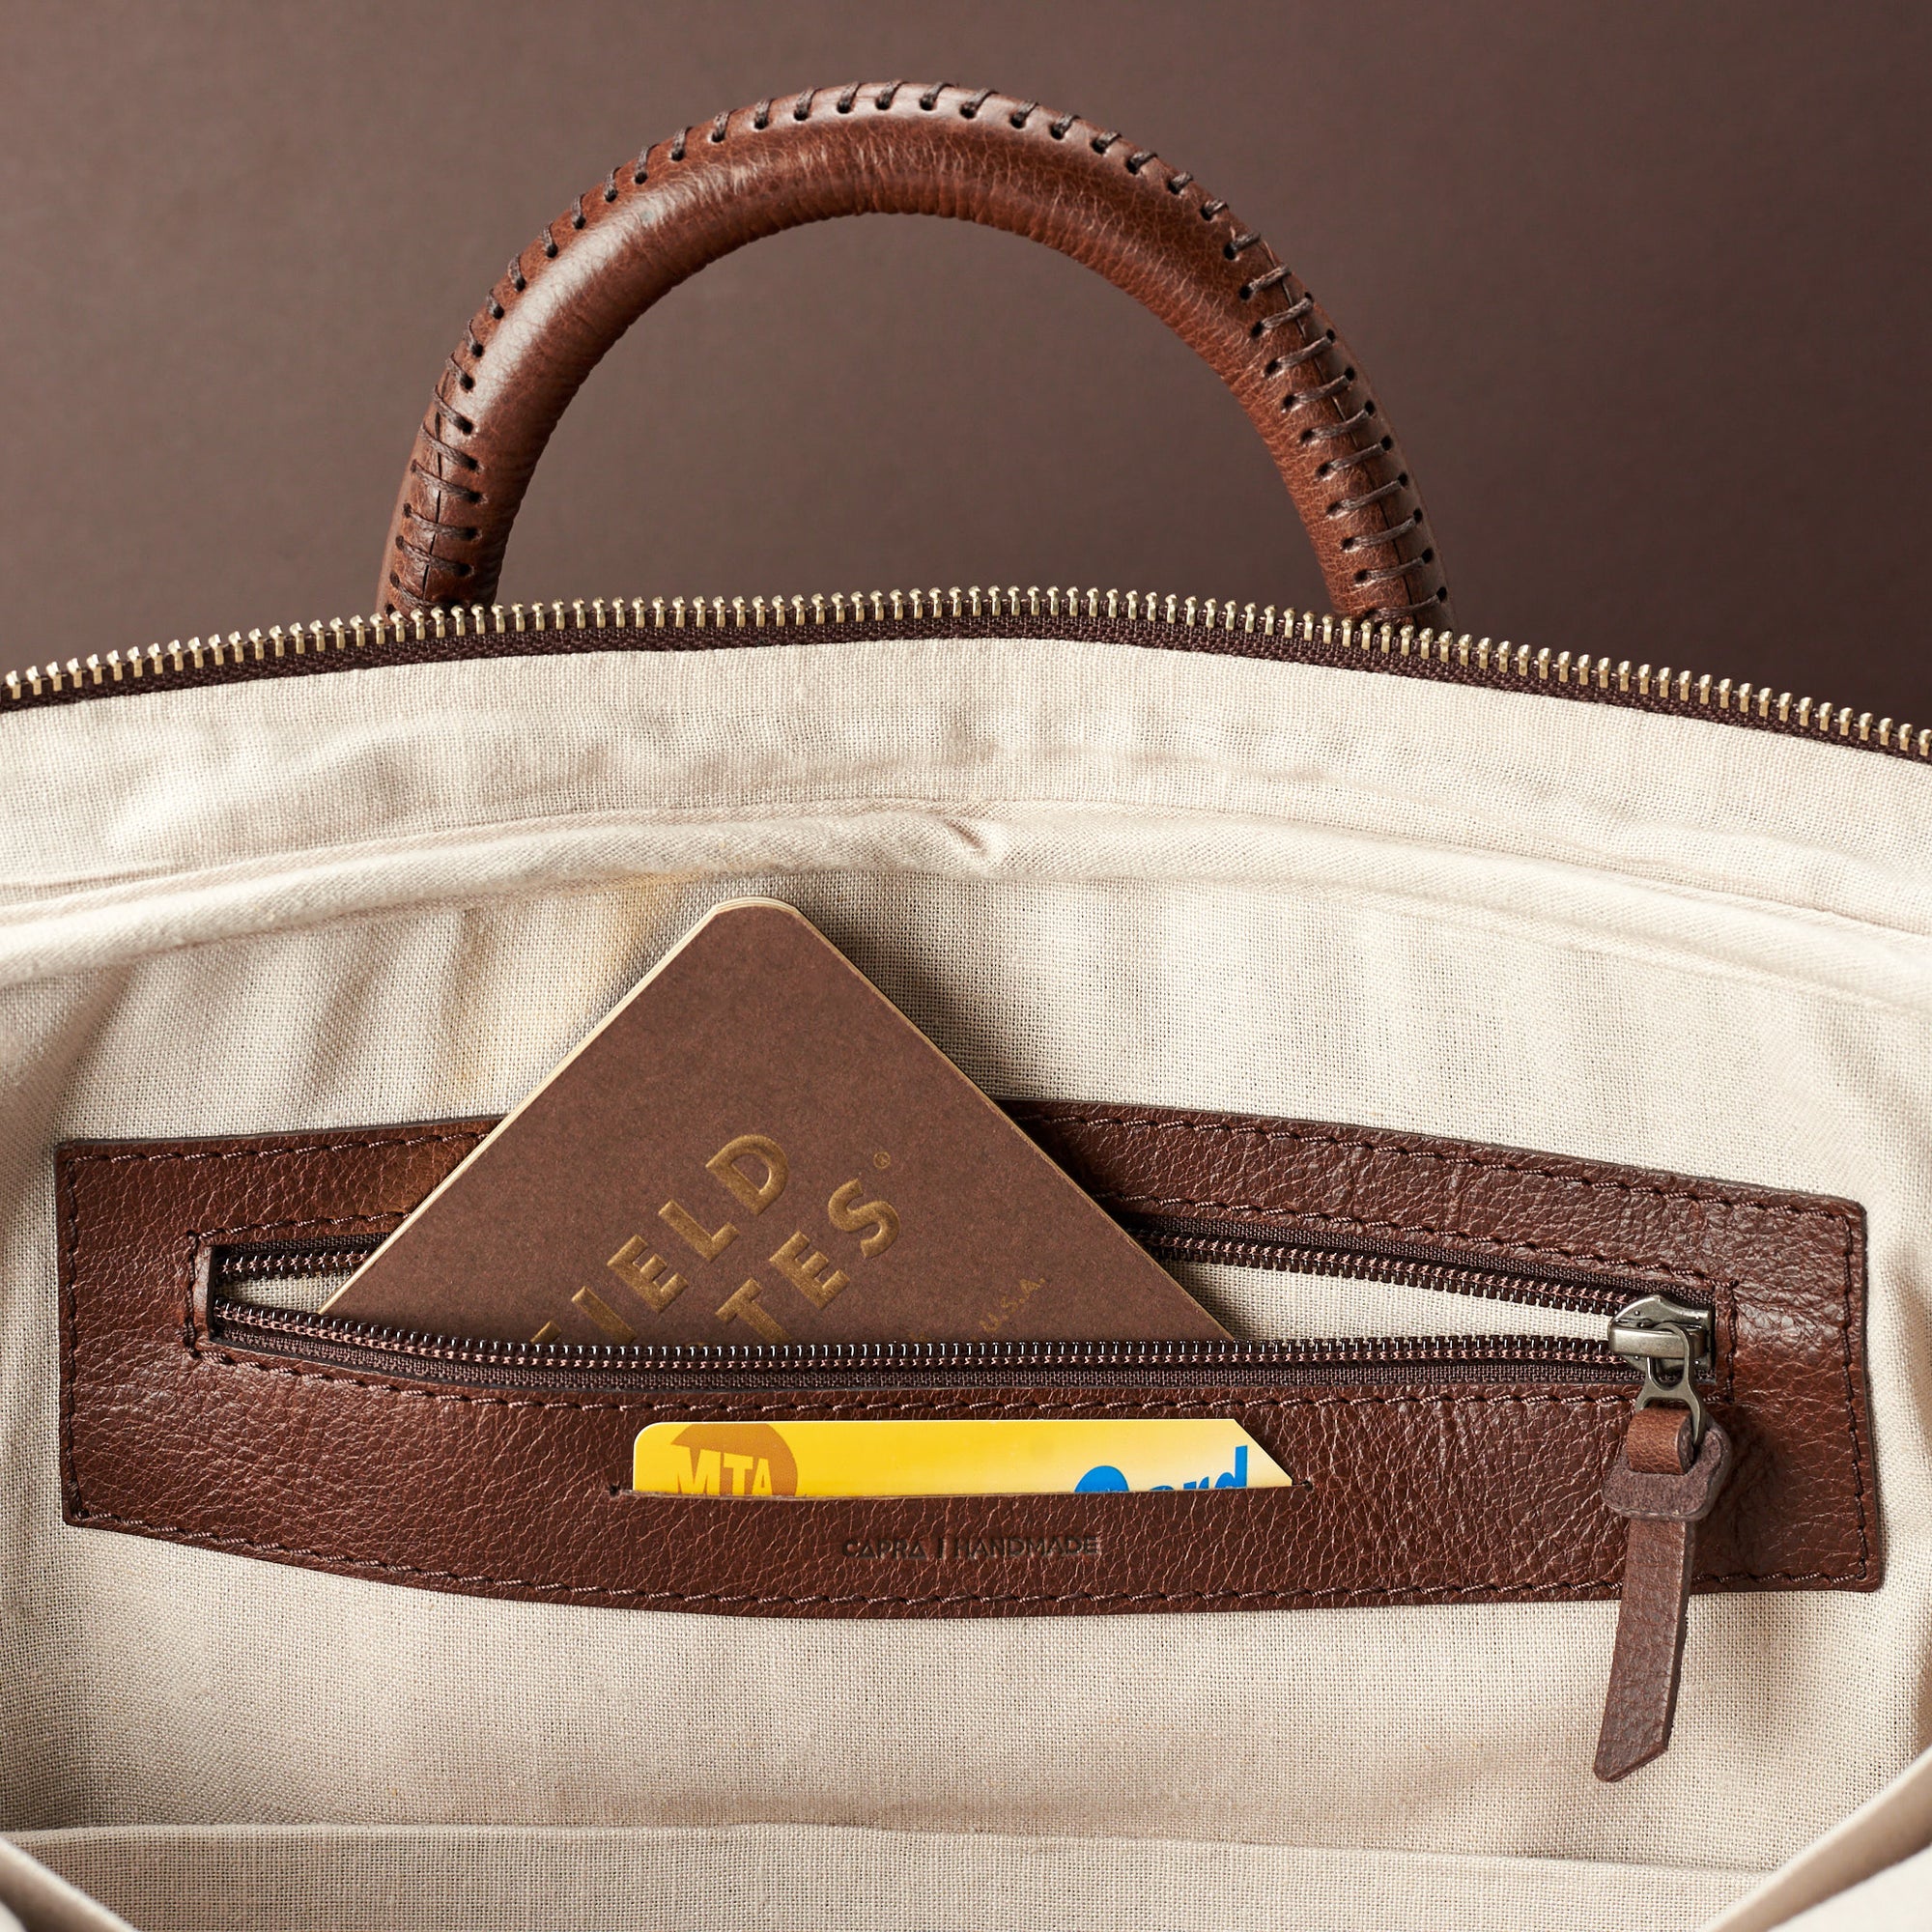 Interior detail for bussiness cards .Brown leather briefcase laptop bag for men. Gazeli laptop briefcase by Capra Leather.